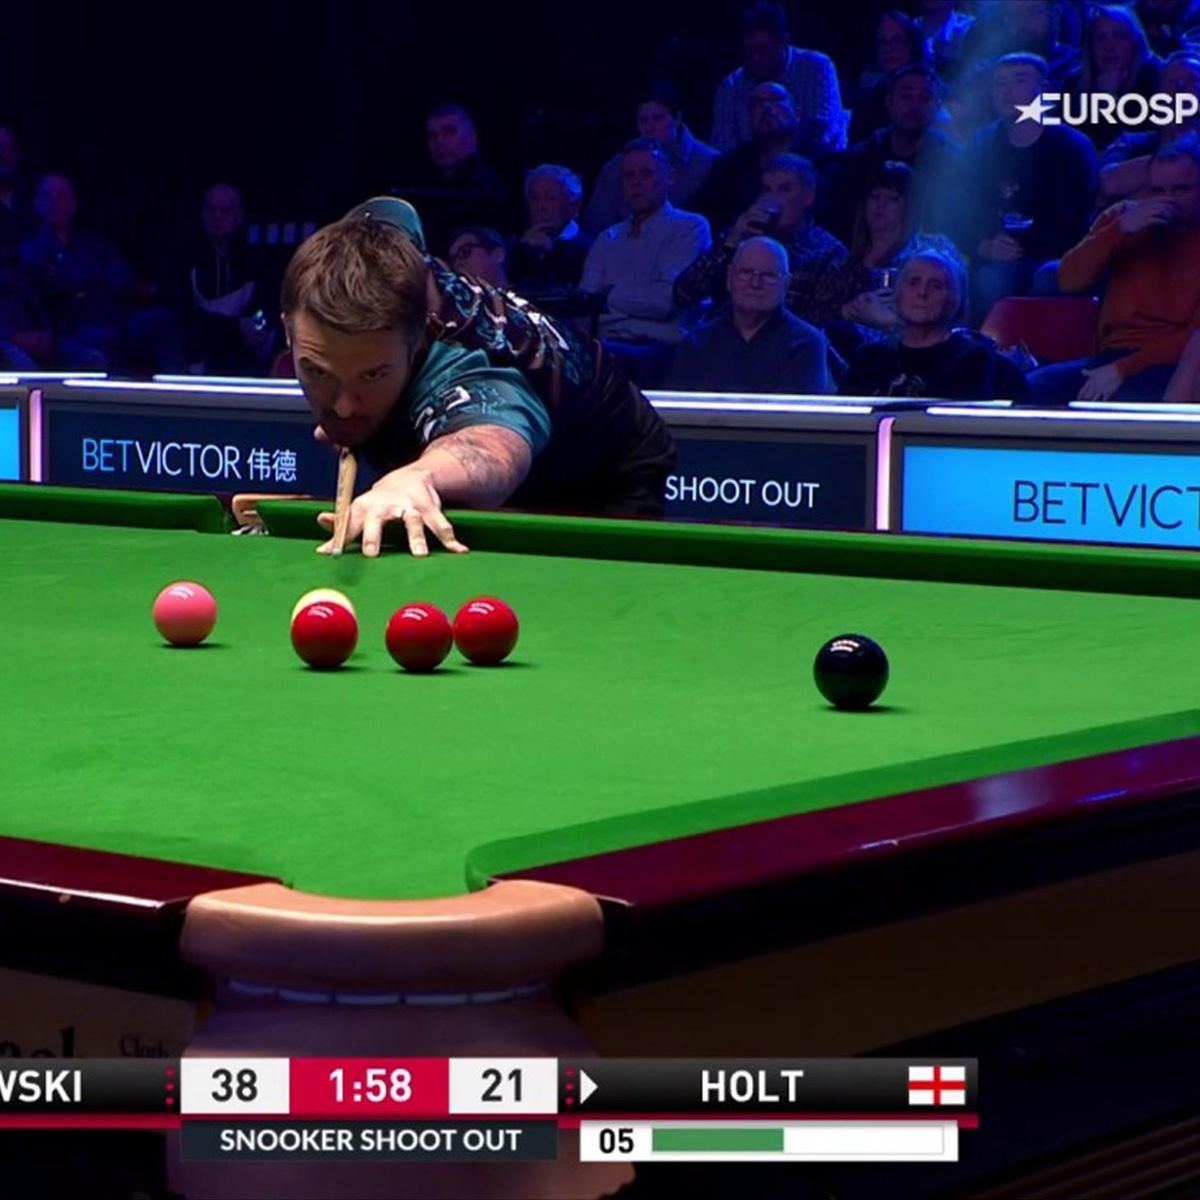 Shoot Out specialist Michael Holt stuns Jack Lisowski with stunning break - Snooker video